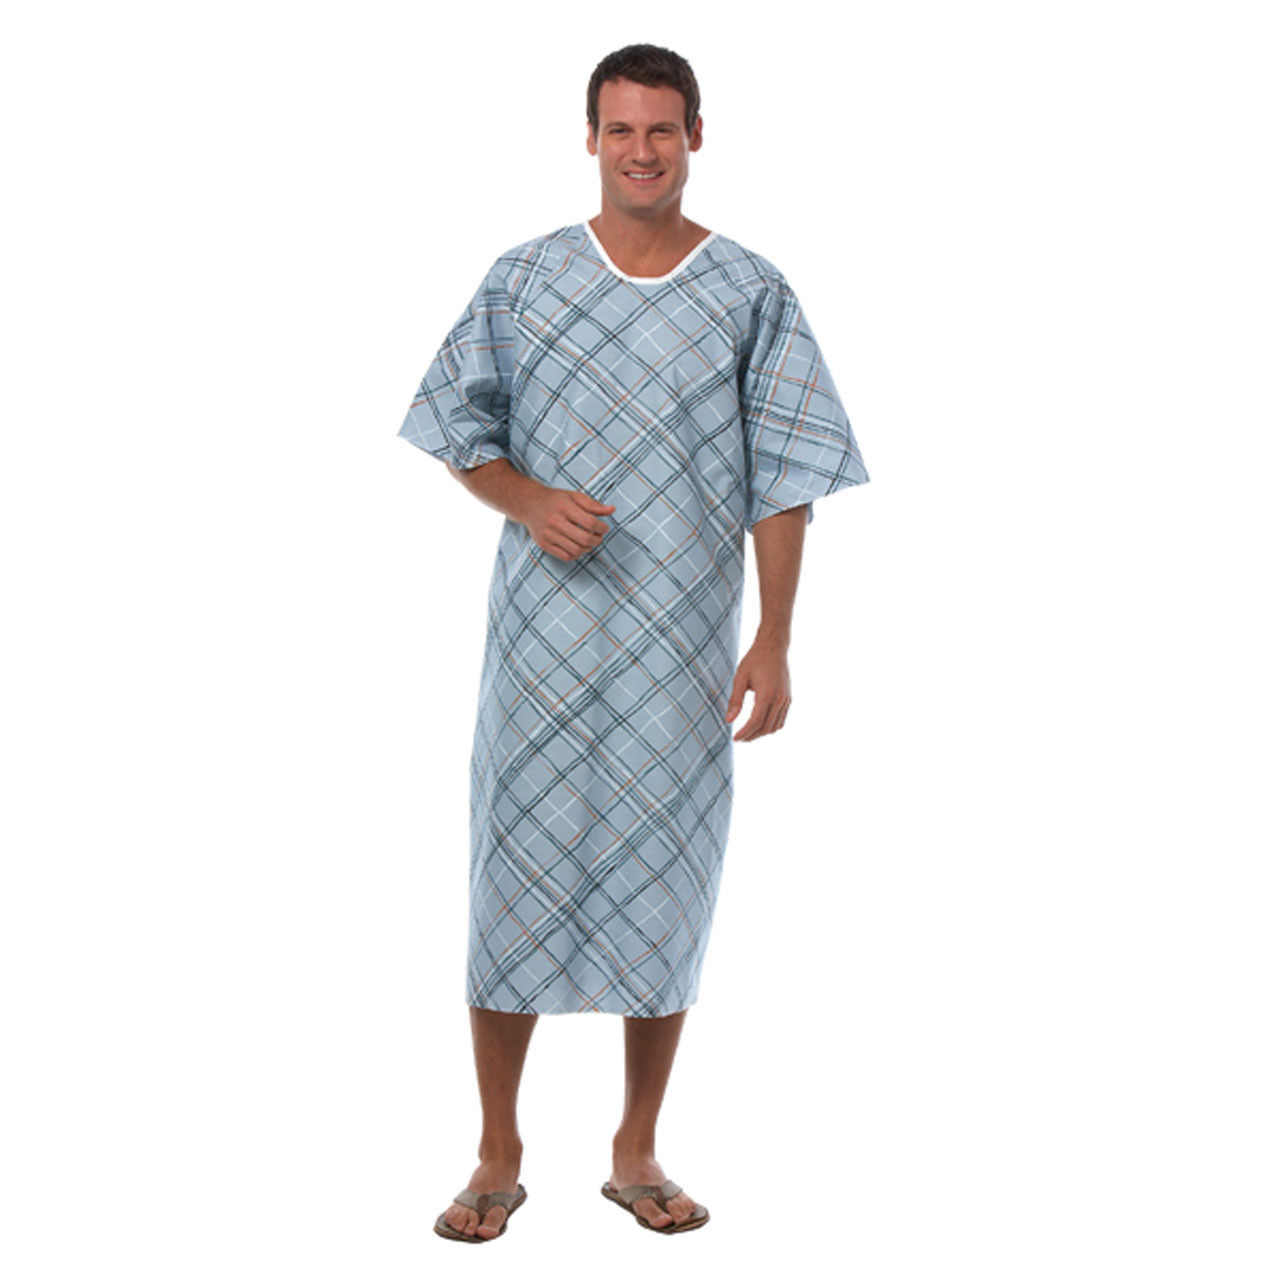 Can the hospital gown be worn comfortably for a long duration?